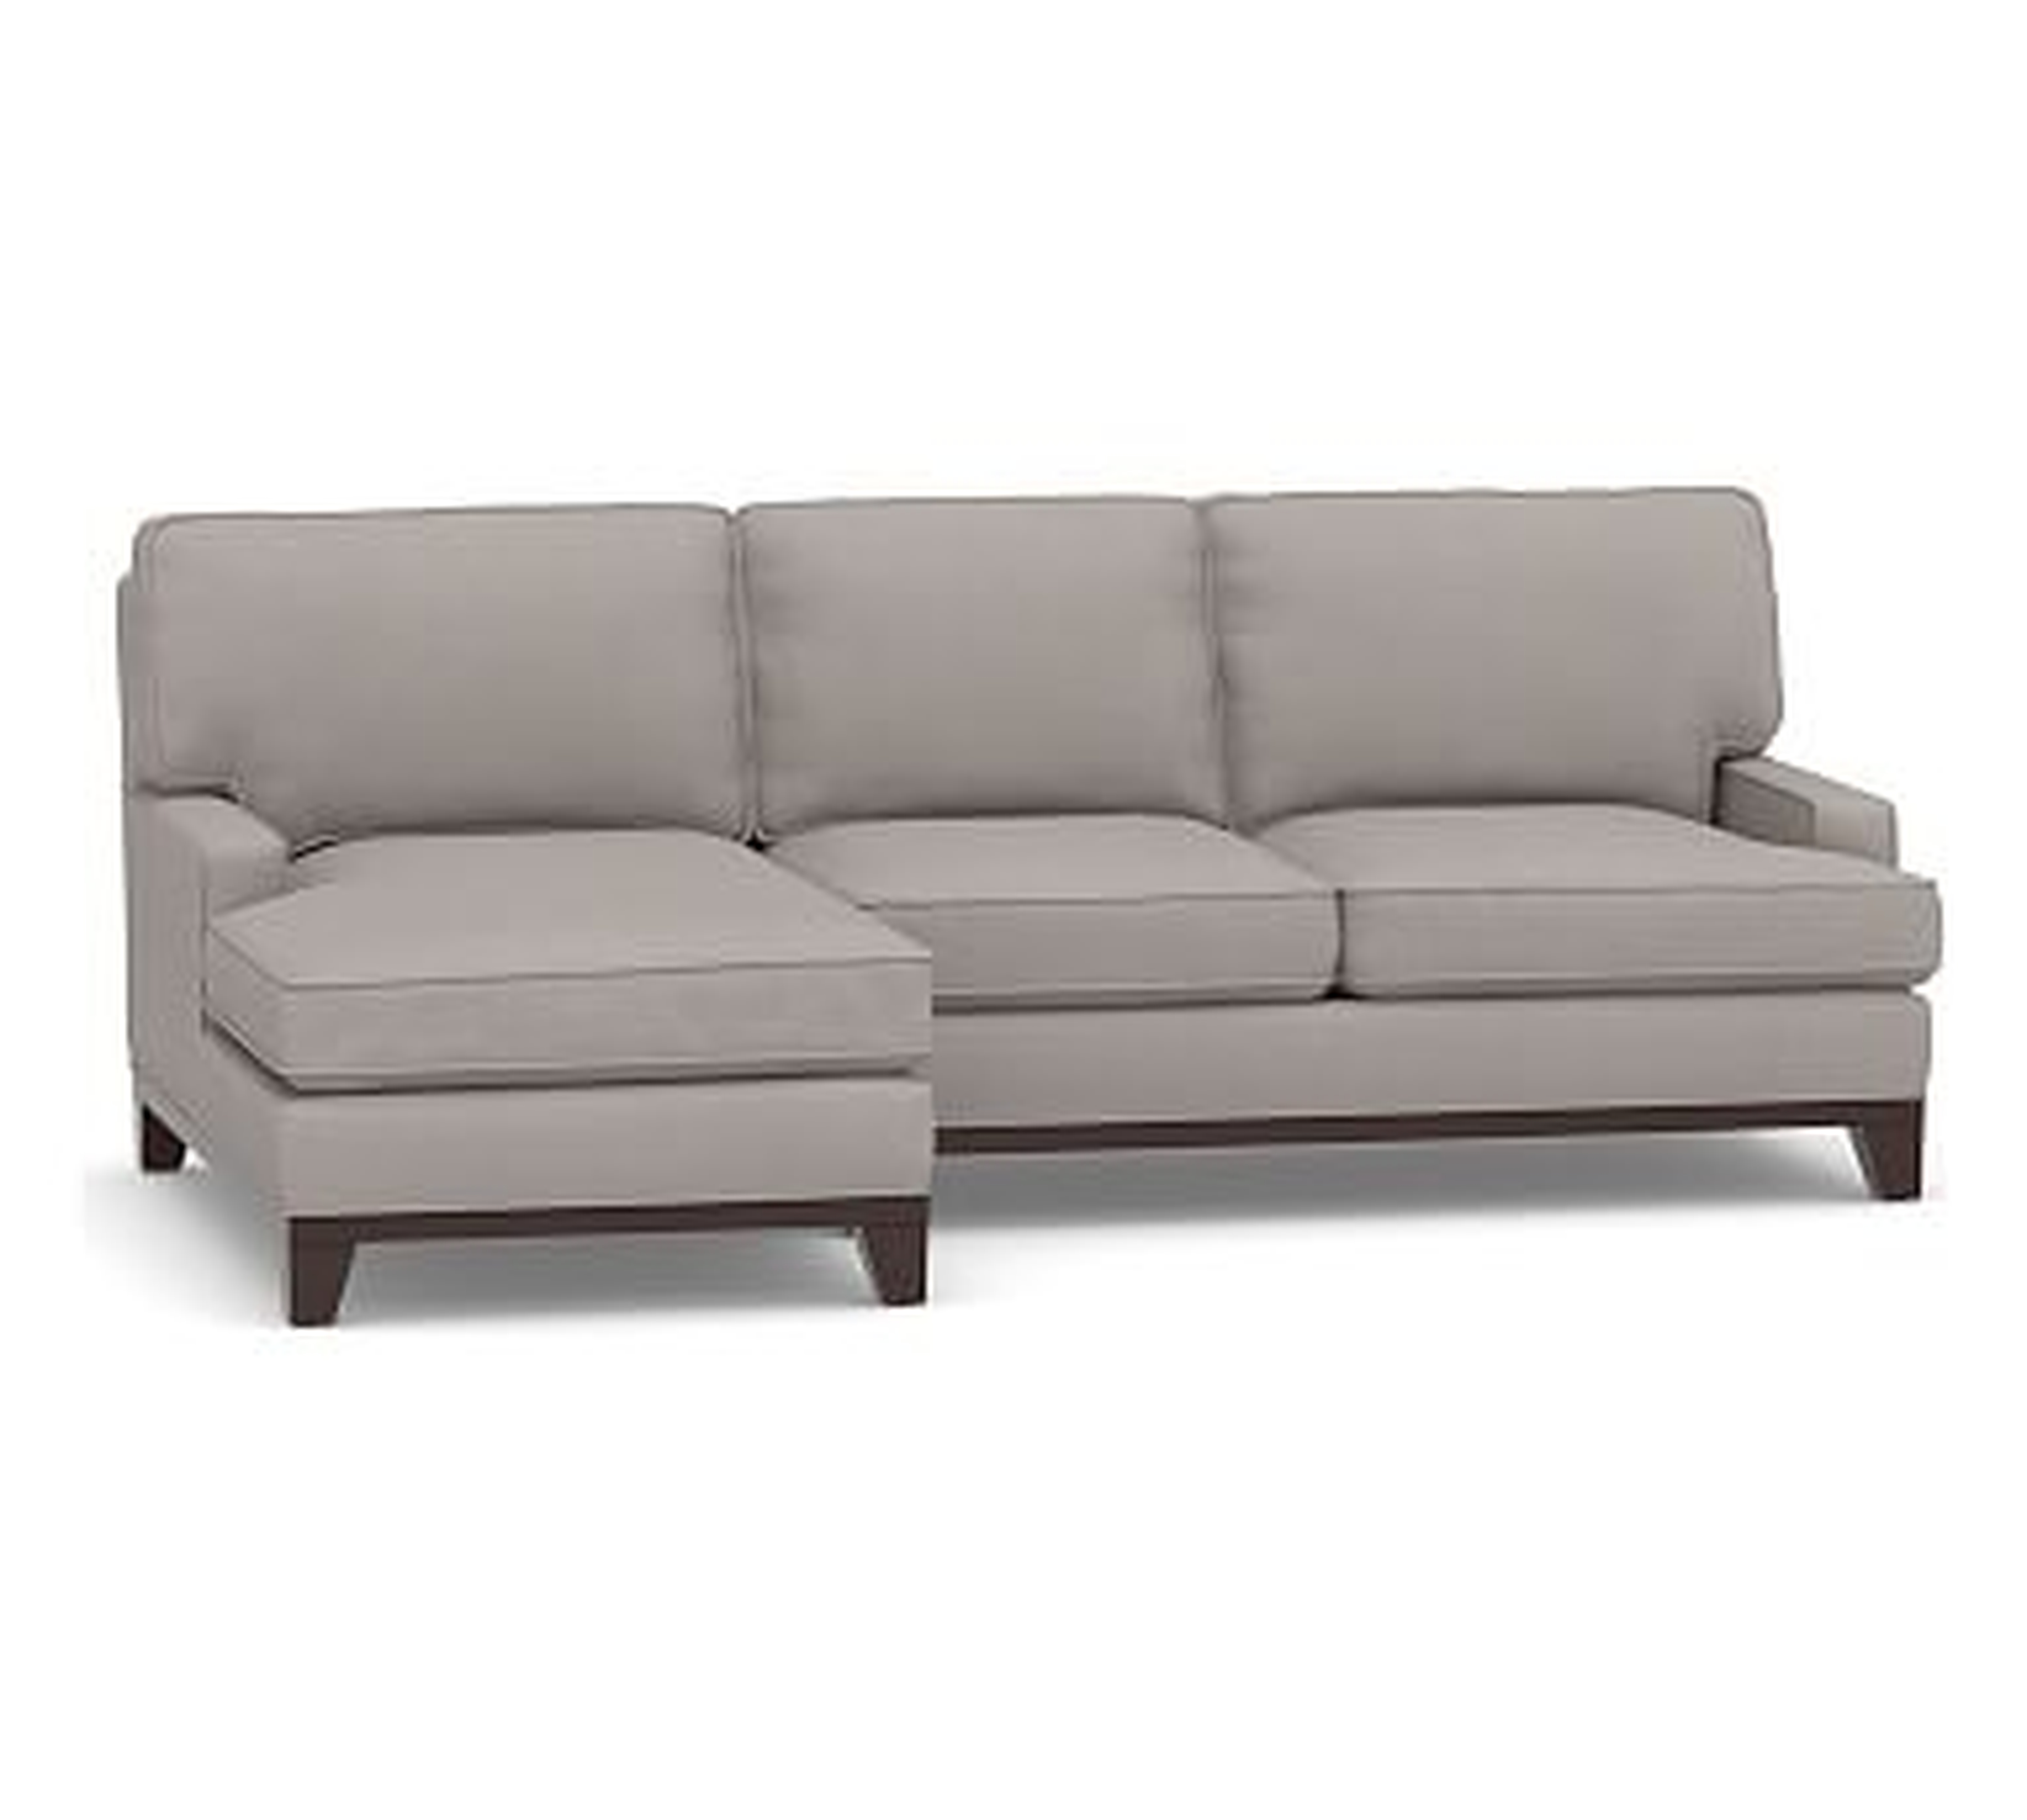 Seabury Upholstered Right Arm Sofa with Chaise Sectional, Down Blend Wrapped Cushions, Belgian Linen Light Gray - Pottery Barn